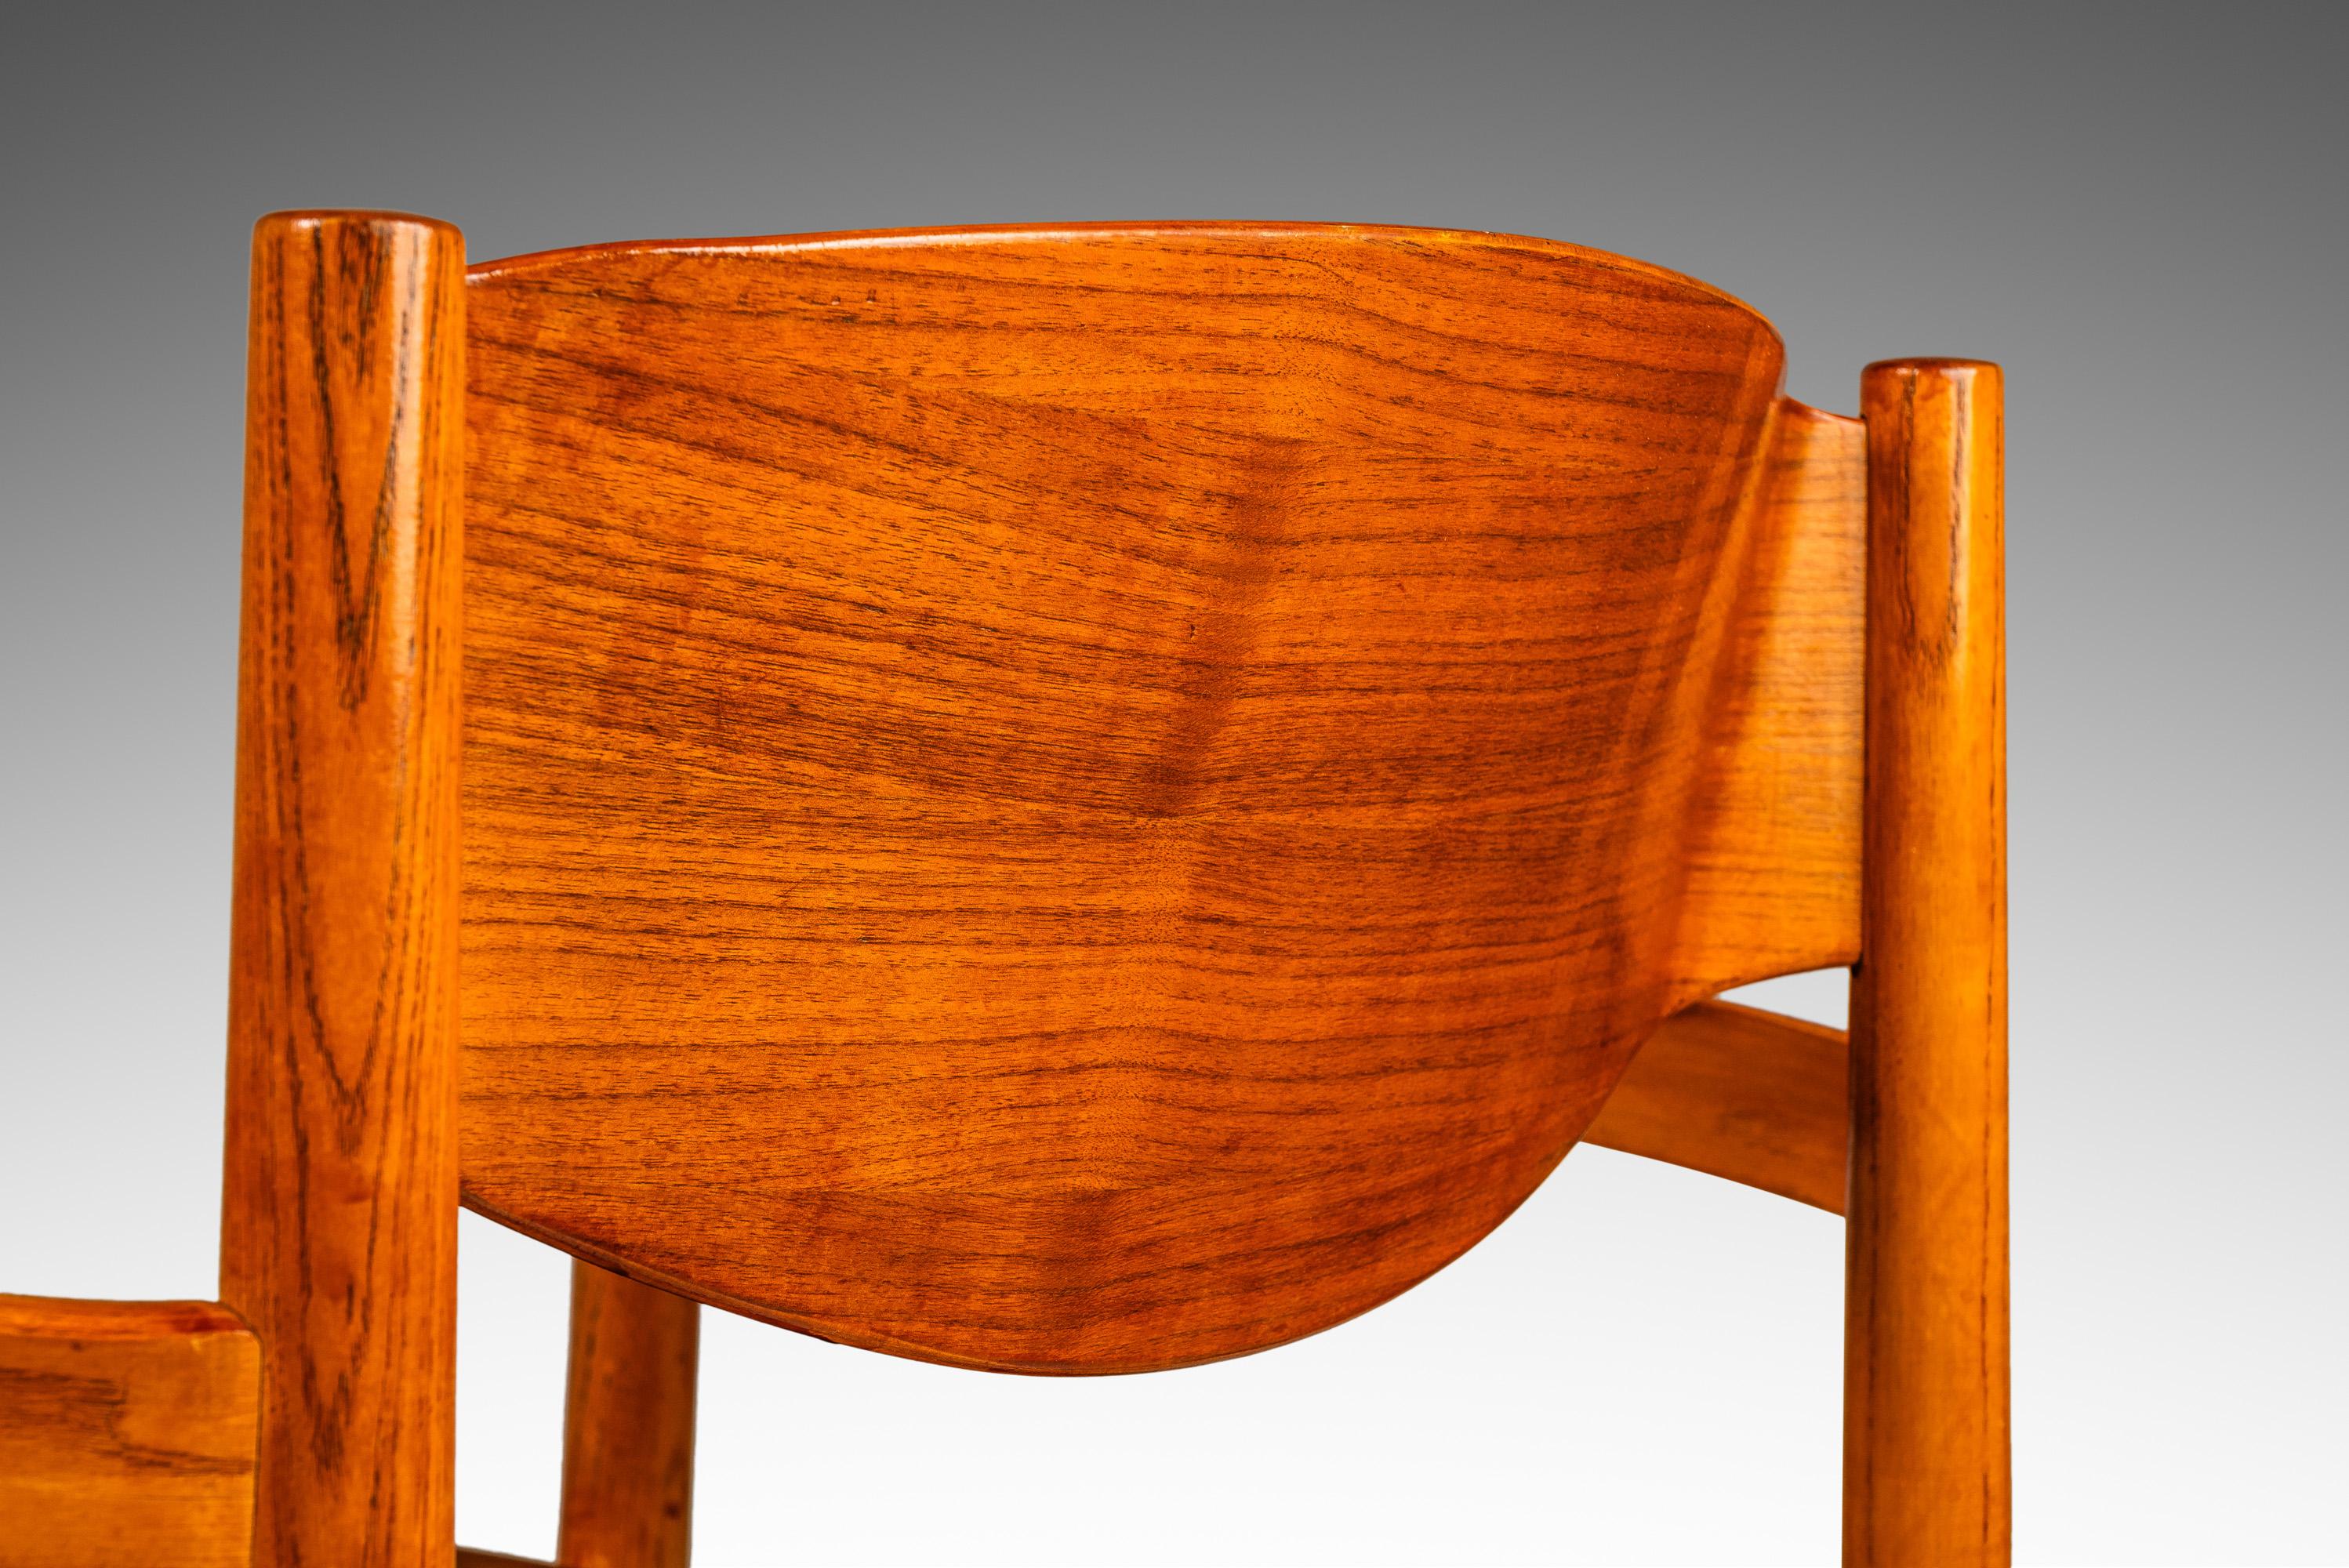 Set of 8 Mid-Century Stacking Chairs: Oak & Walnut, Jens Risom Design, USA, 1960 For Sale 5